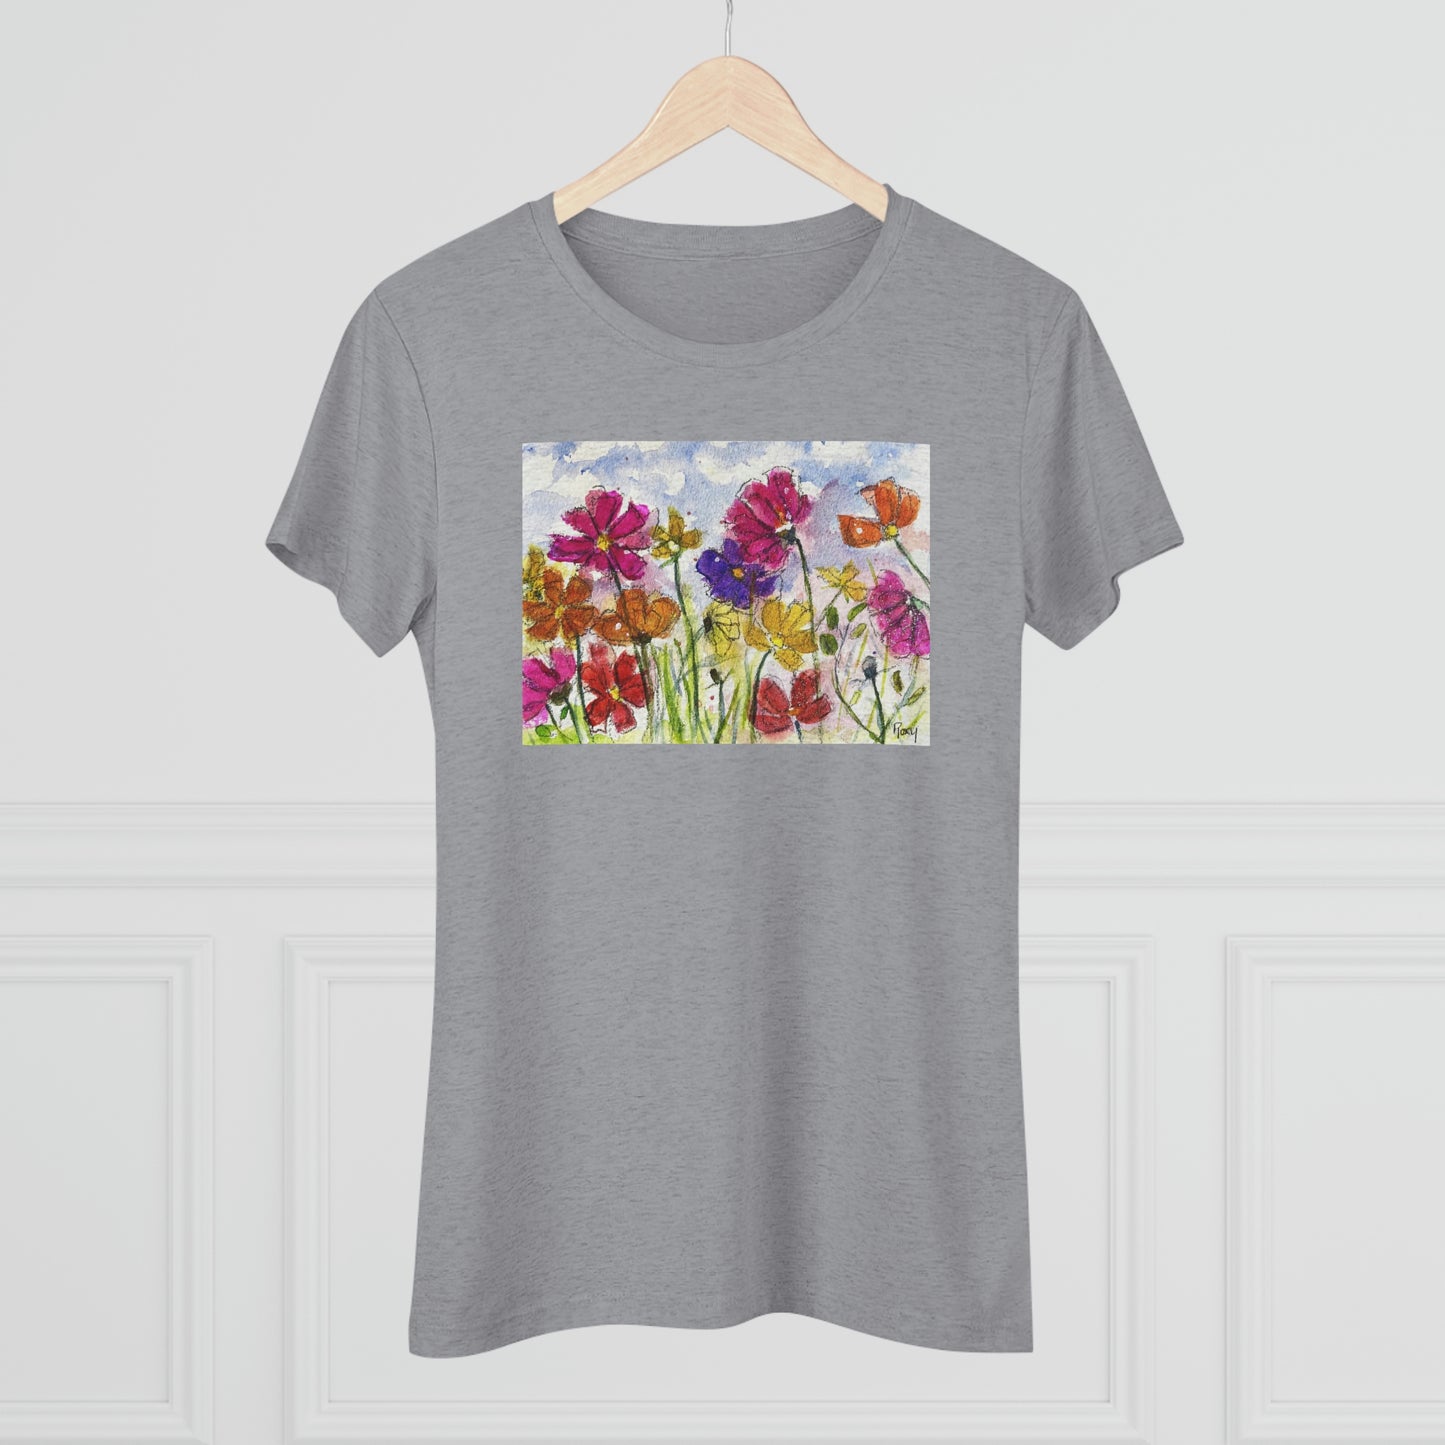 Cosmos Garden (image on front) Women's fitted Triblend Tee  tee shirt